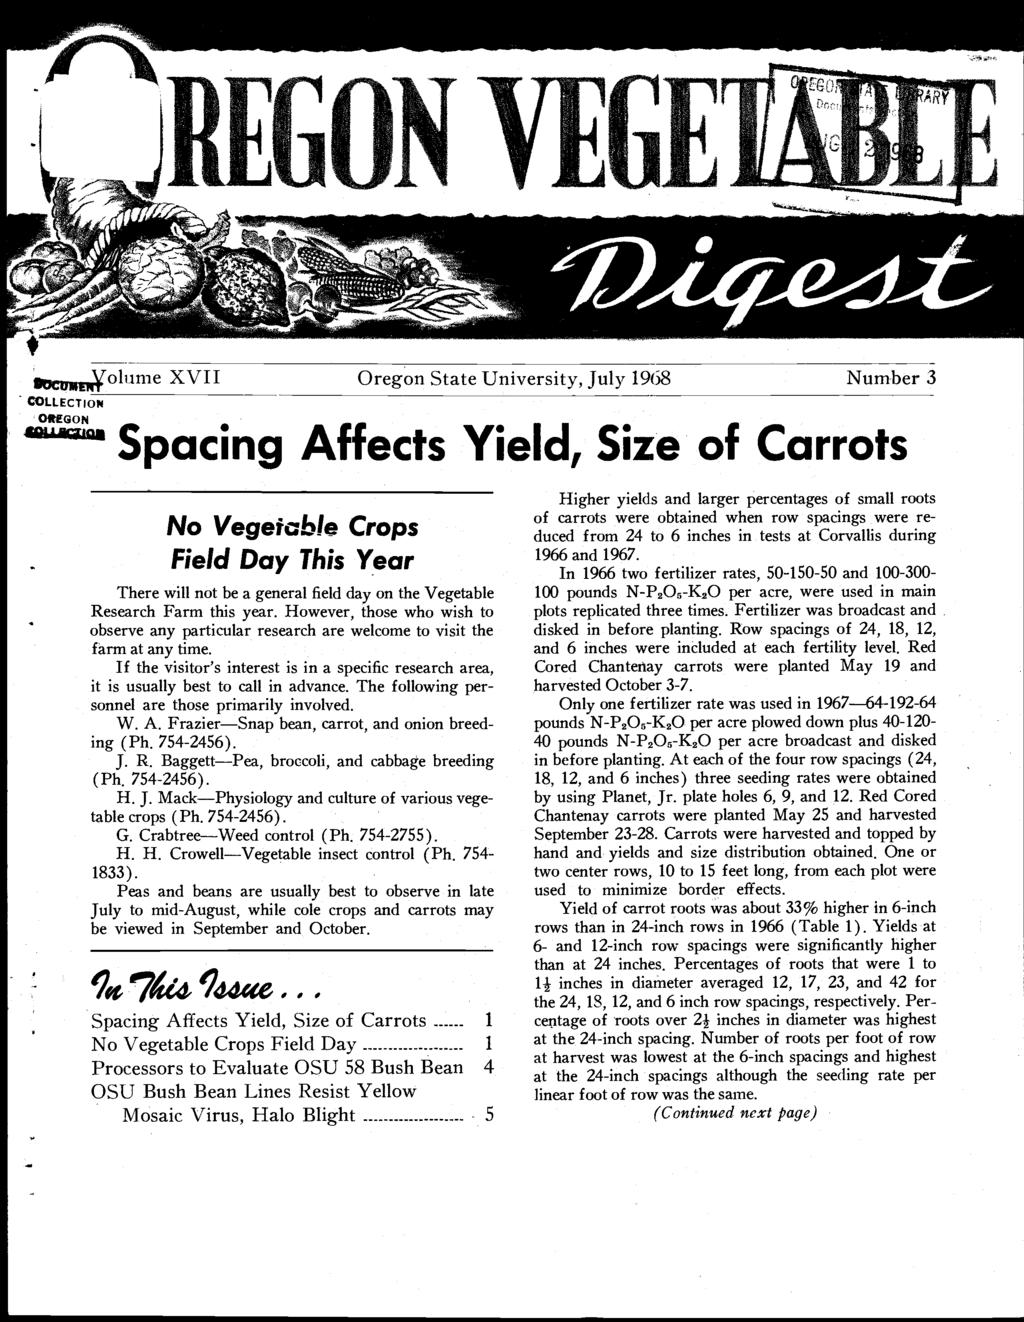 RY $,,olurne XVII Oregon State University, July 1968 Number 3 - COLLECTION OWEGON QI Spacing Affects Yield, Size of Carrots No Vegeirable Crops Field Day This Year There will not be a general field